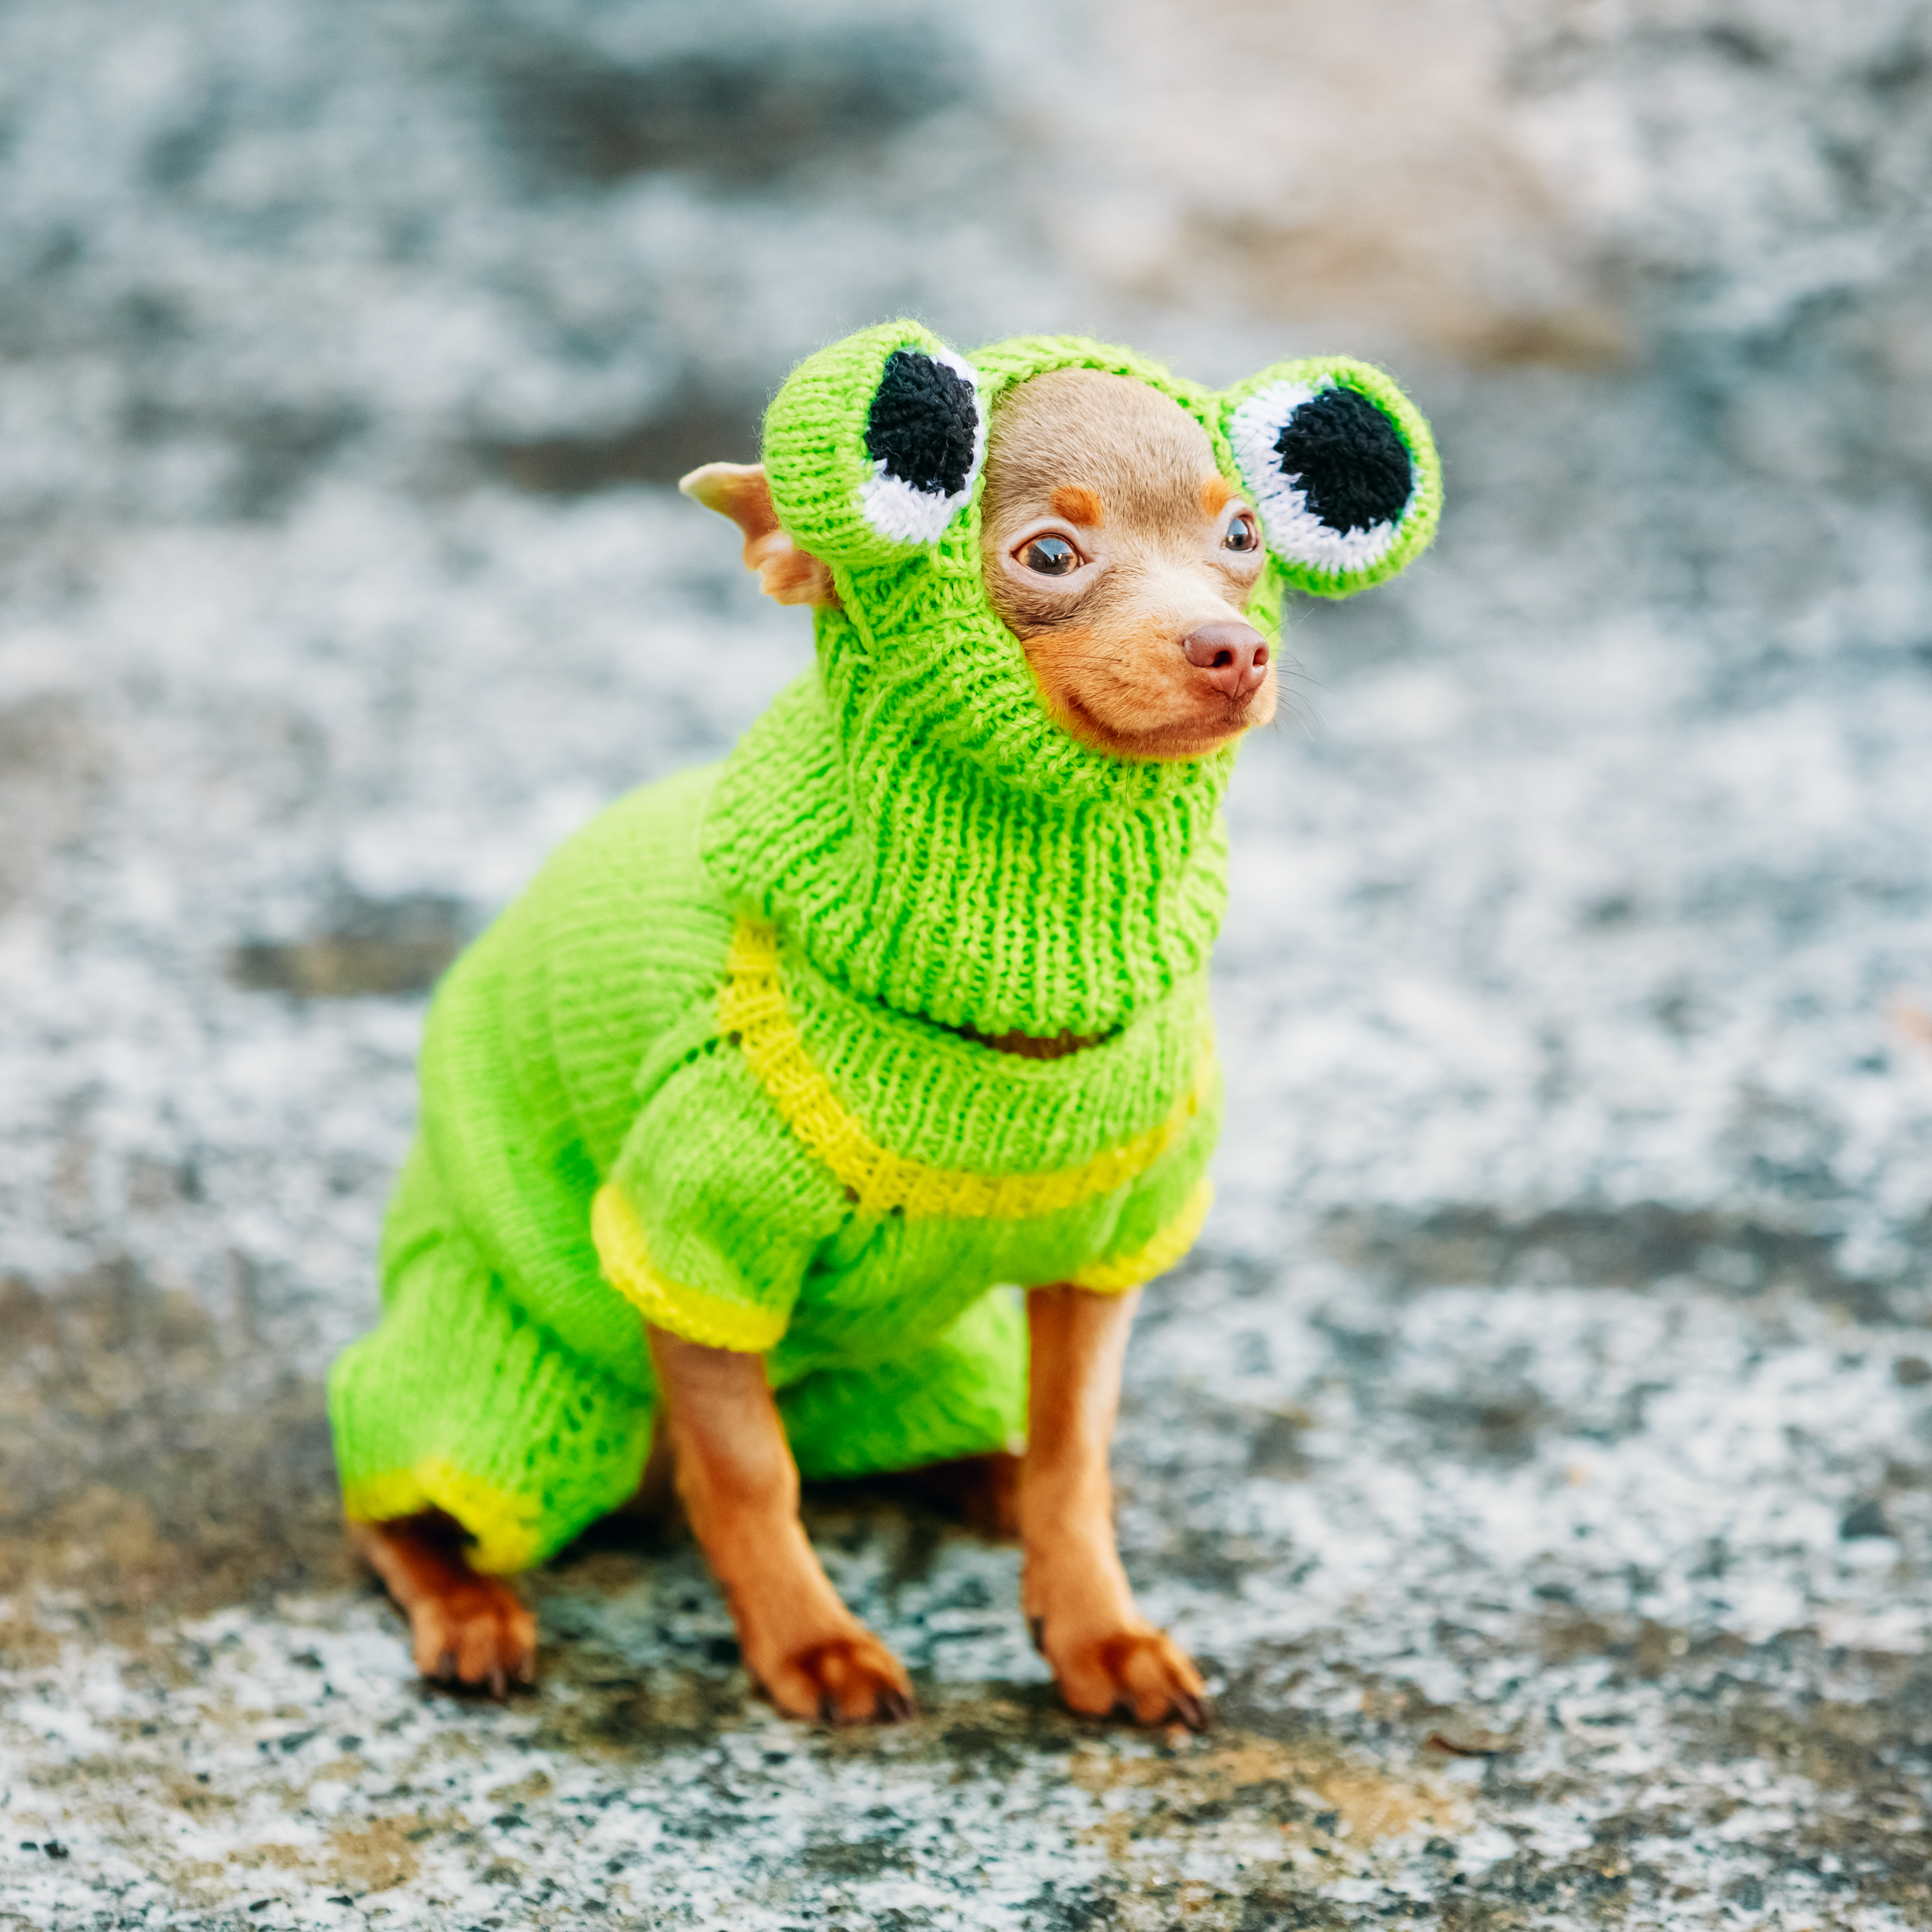 A small dog wearing a green coat